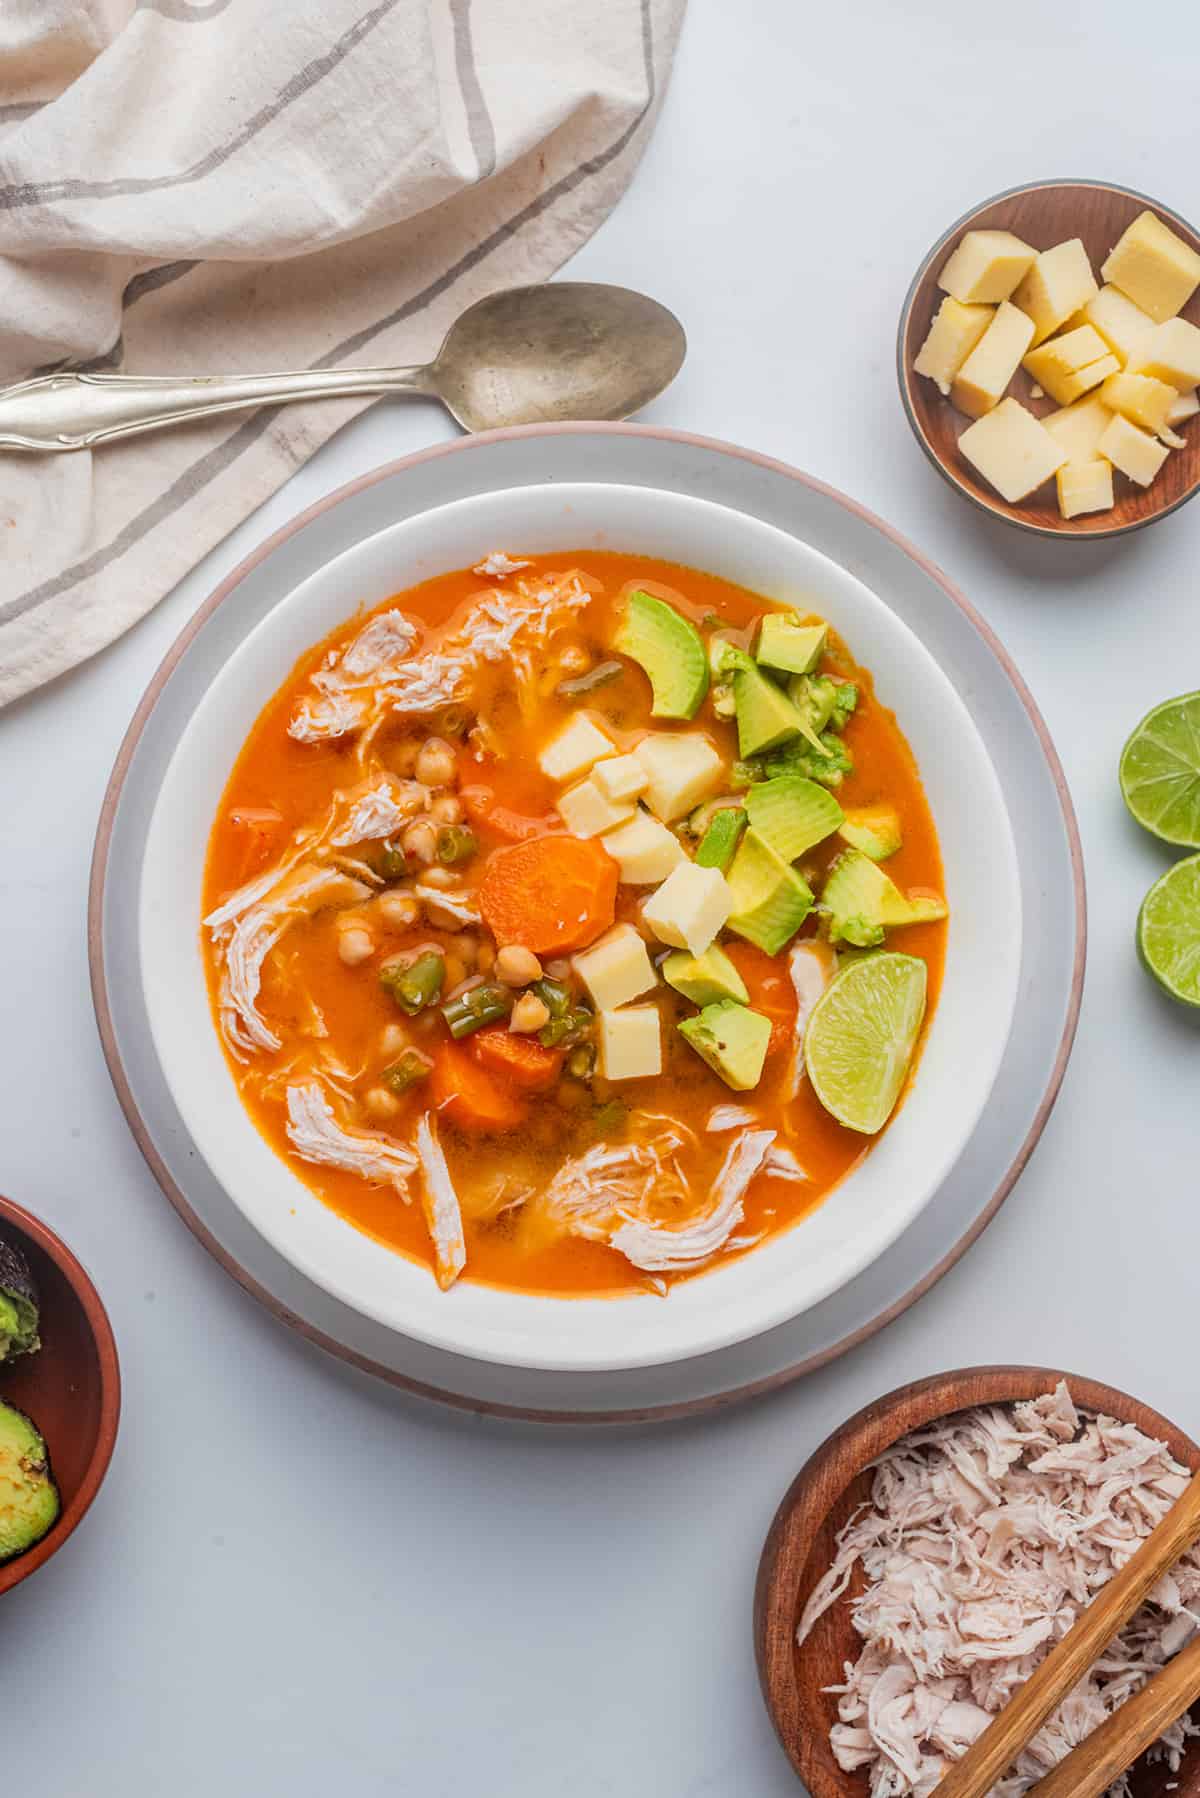 Caldo Tlalpeño served in a white bowl and topped with avocado and cheese.